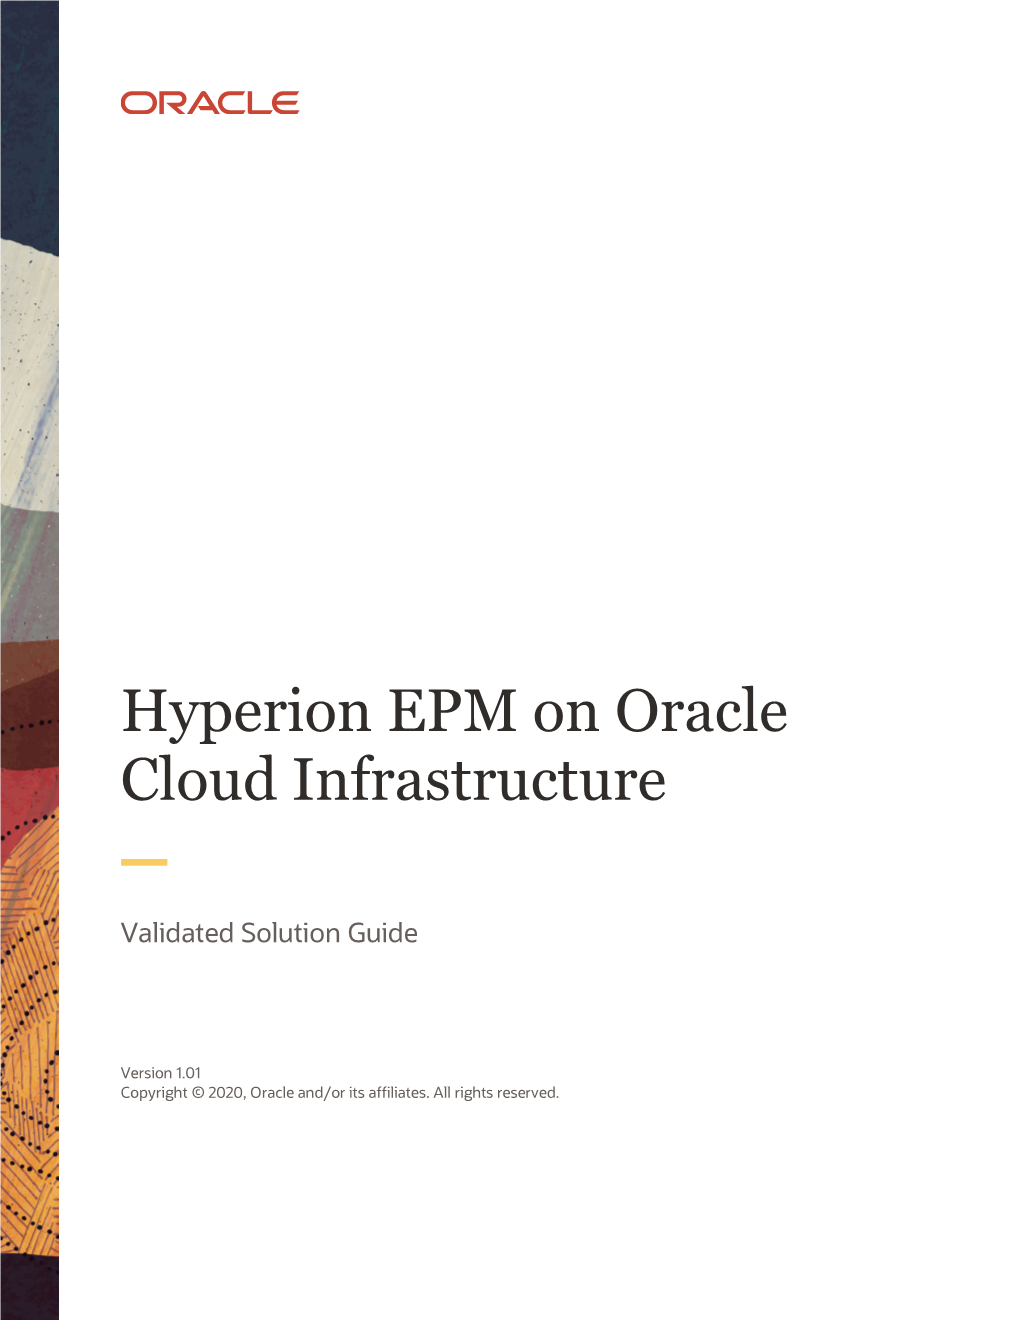 Hyperion EPM on Oracle Cloud Infrastructure